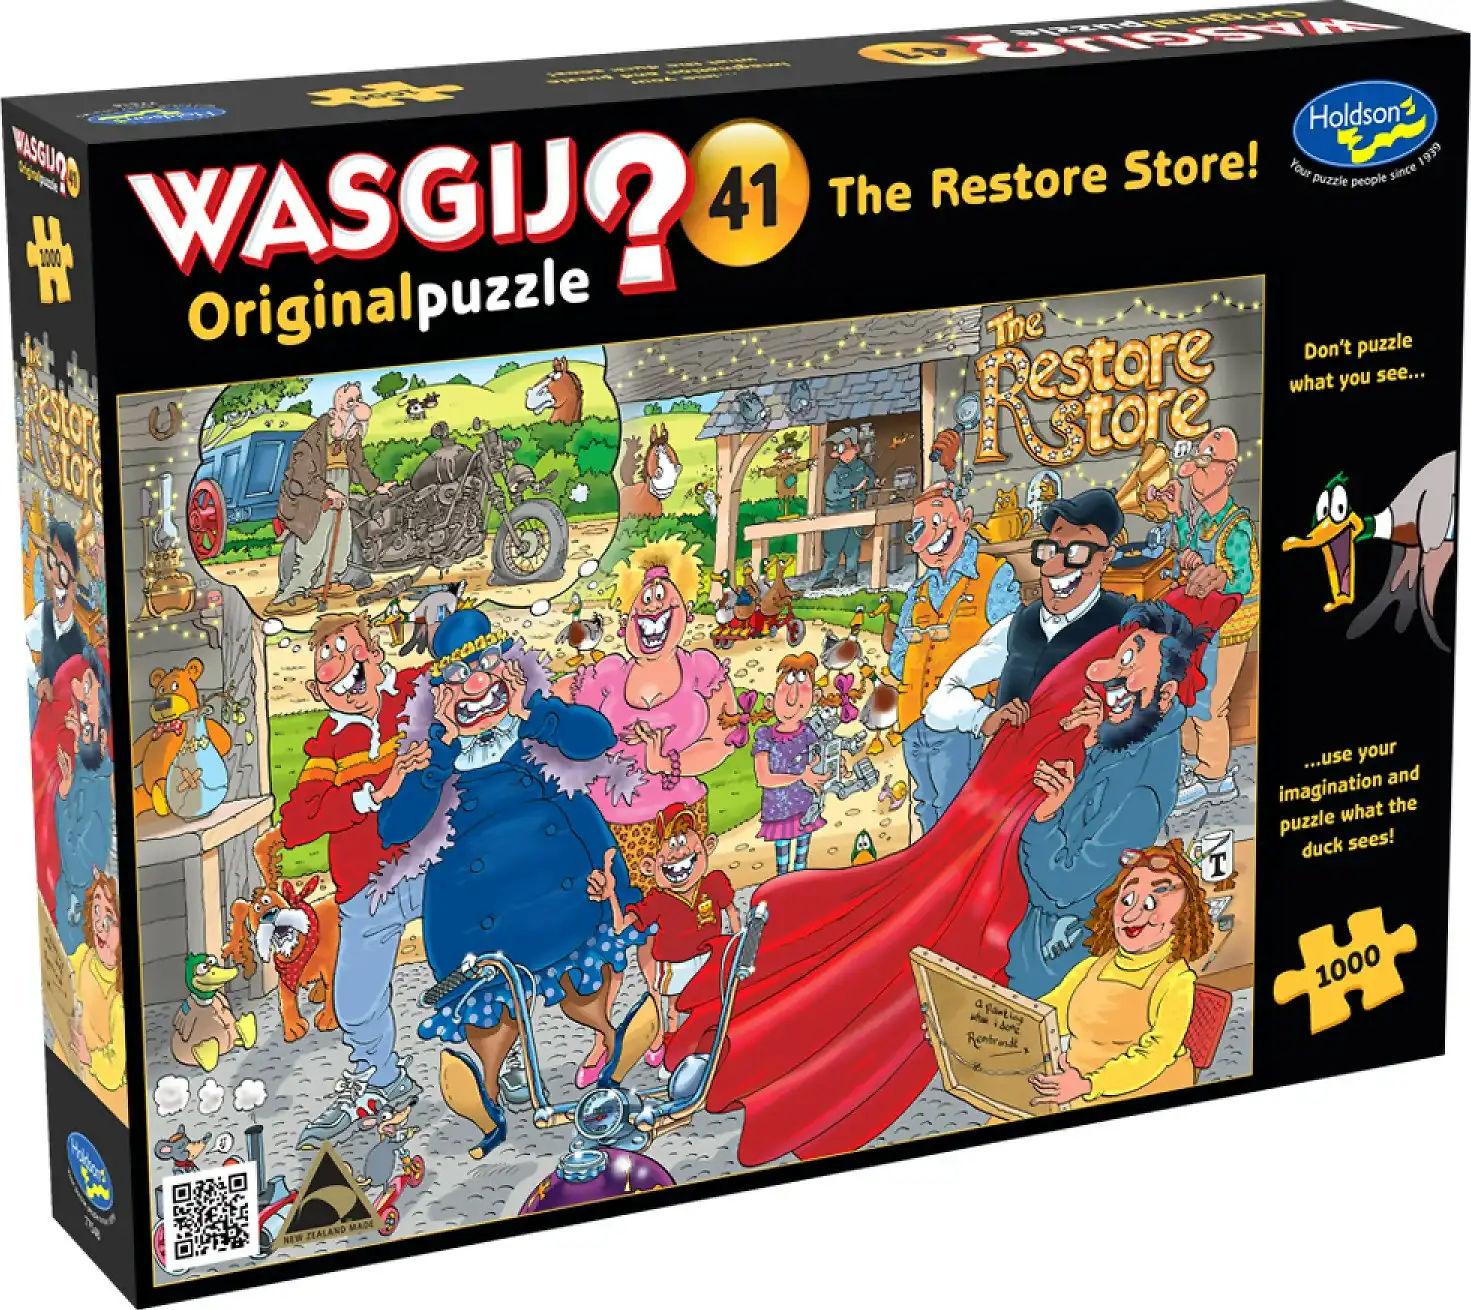 Wasgij - Original 41 - The Restore Store - Holdson Jigsaw Puzzle 1000 Pieces